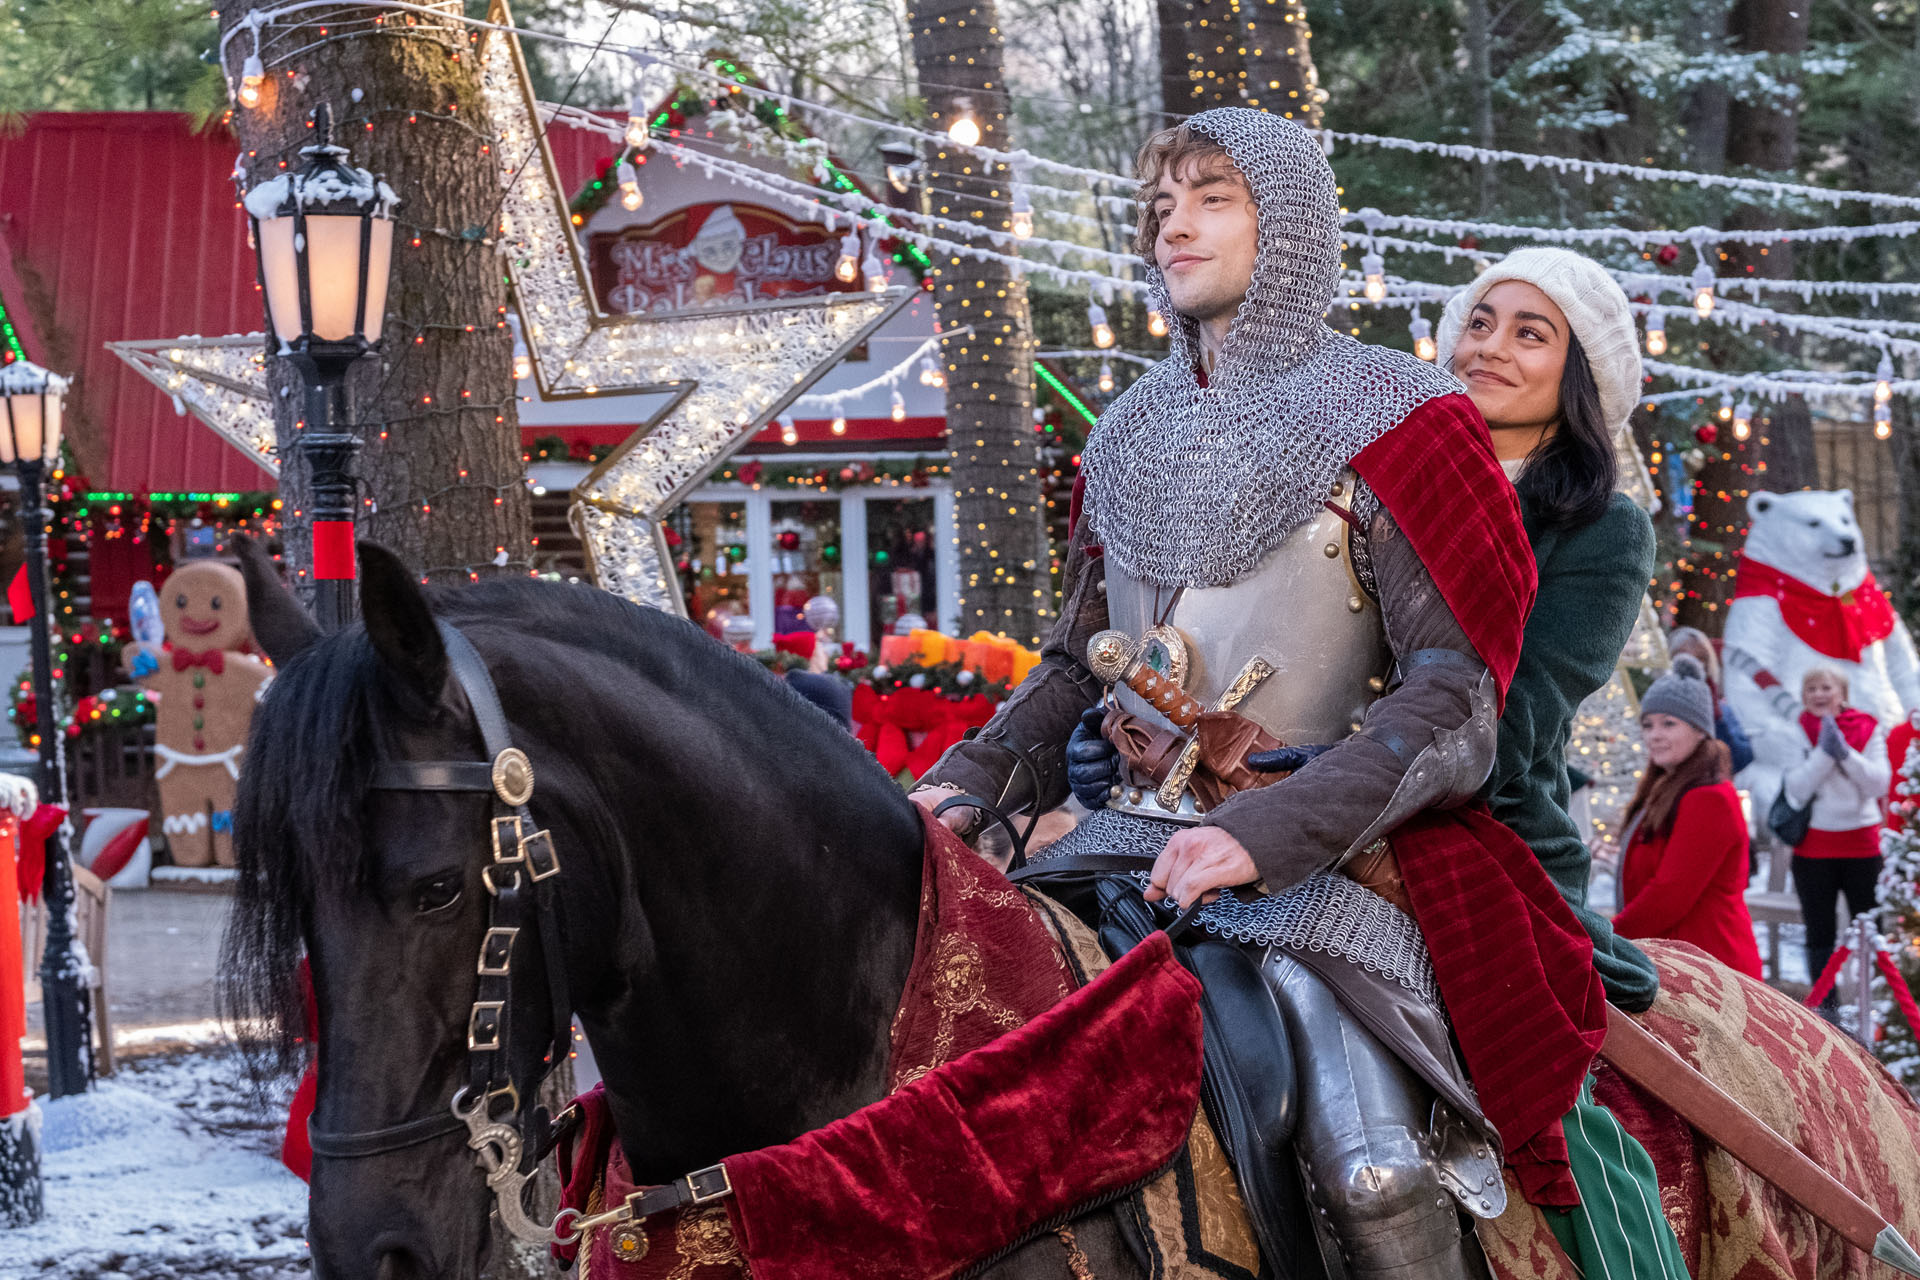 a still from the knight before christmas